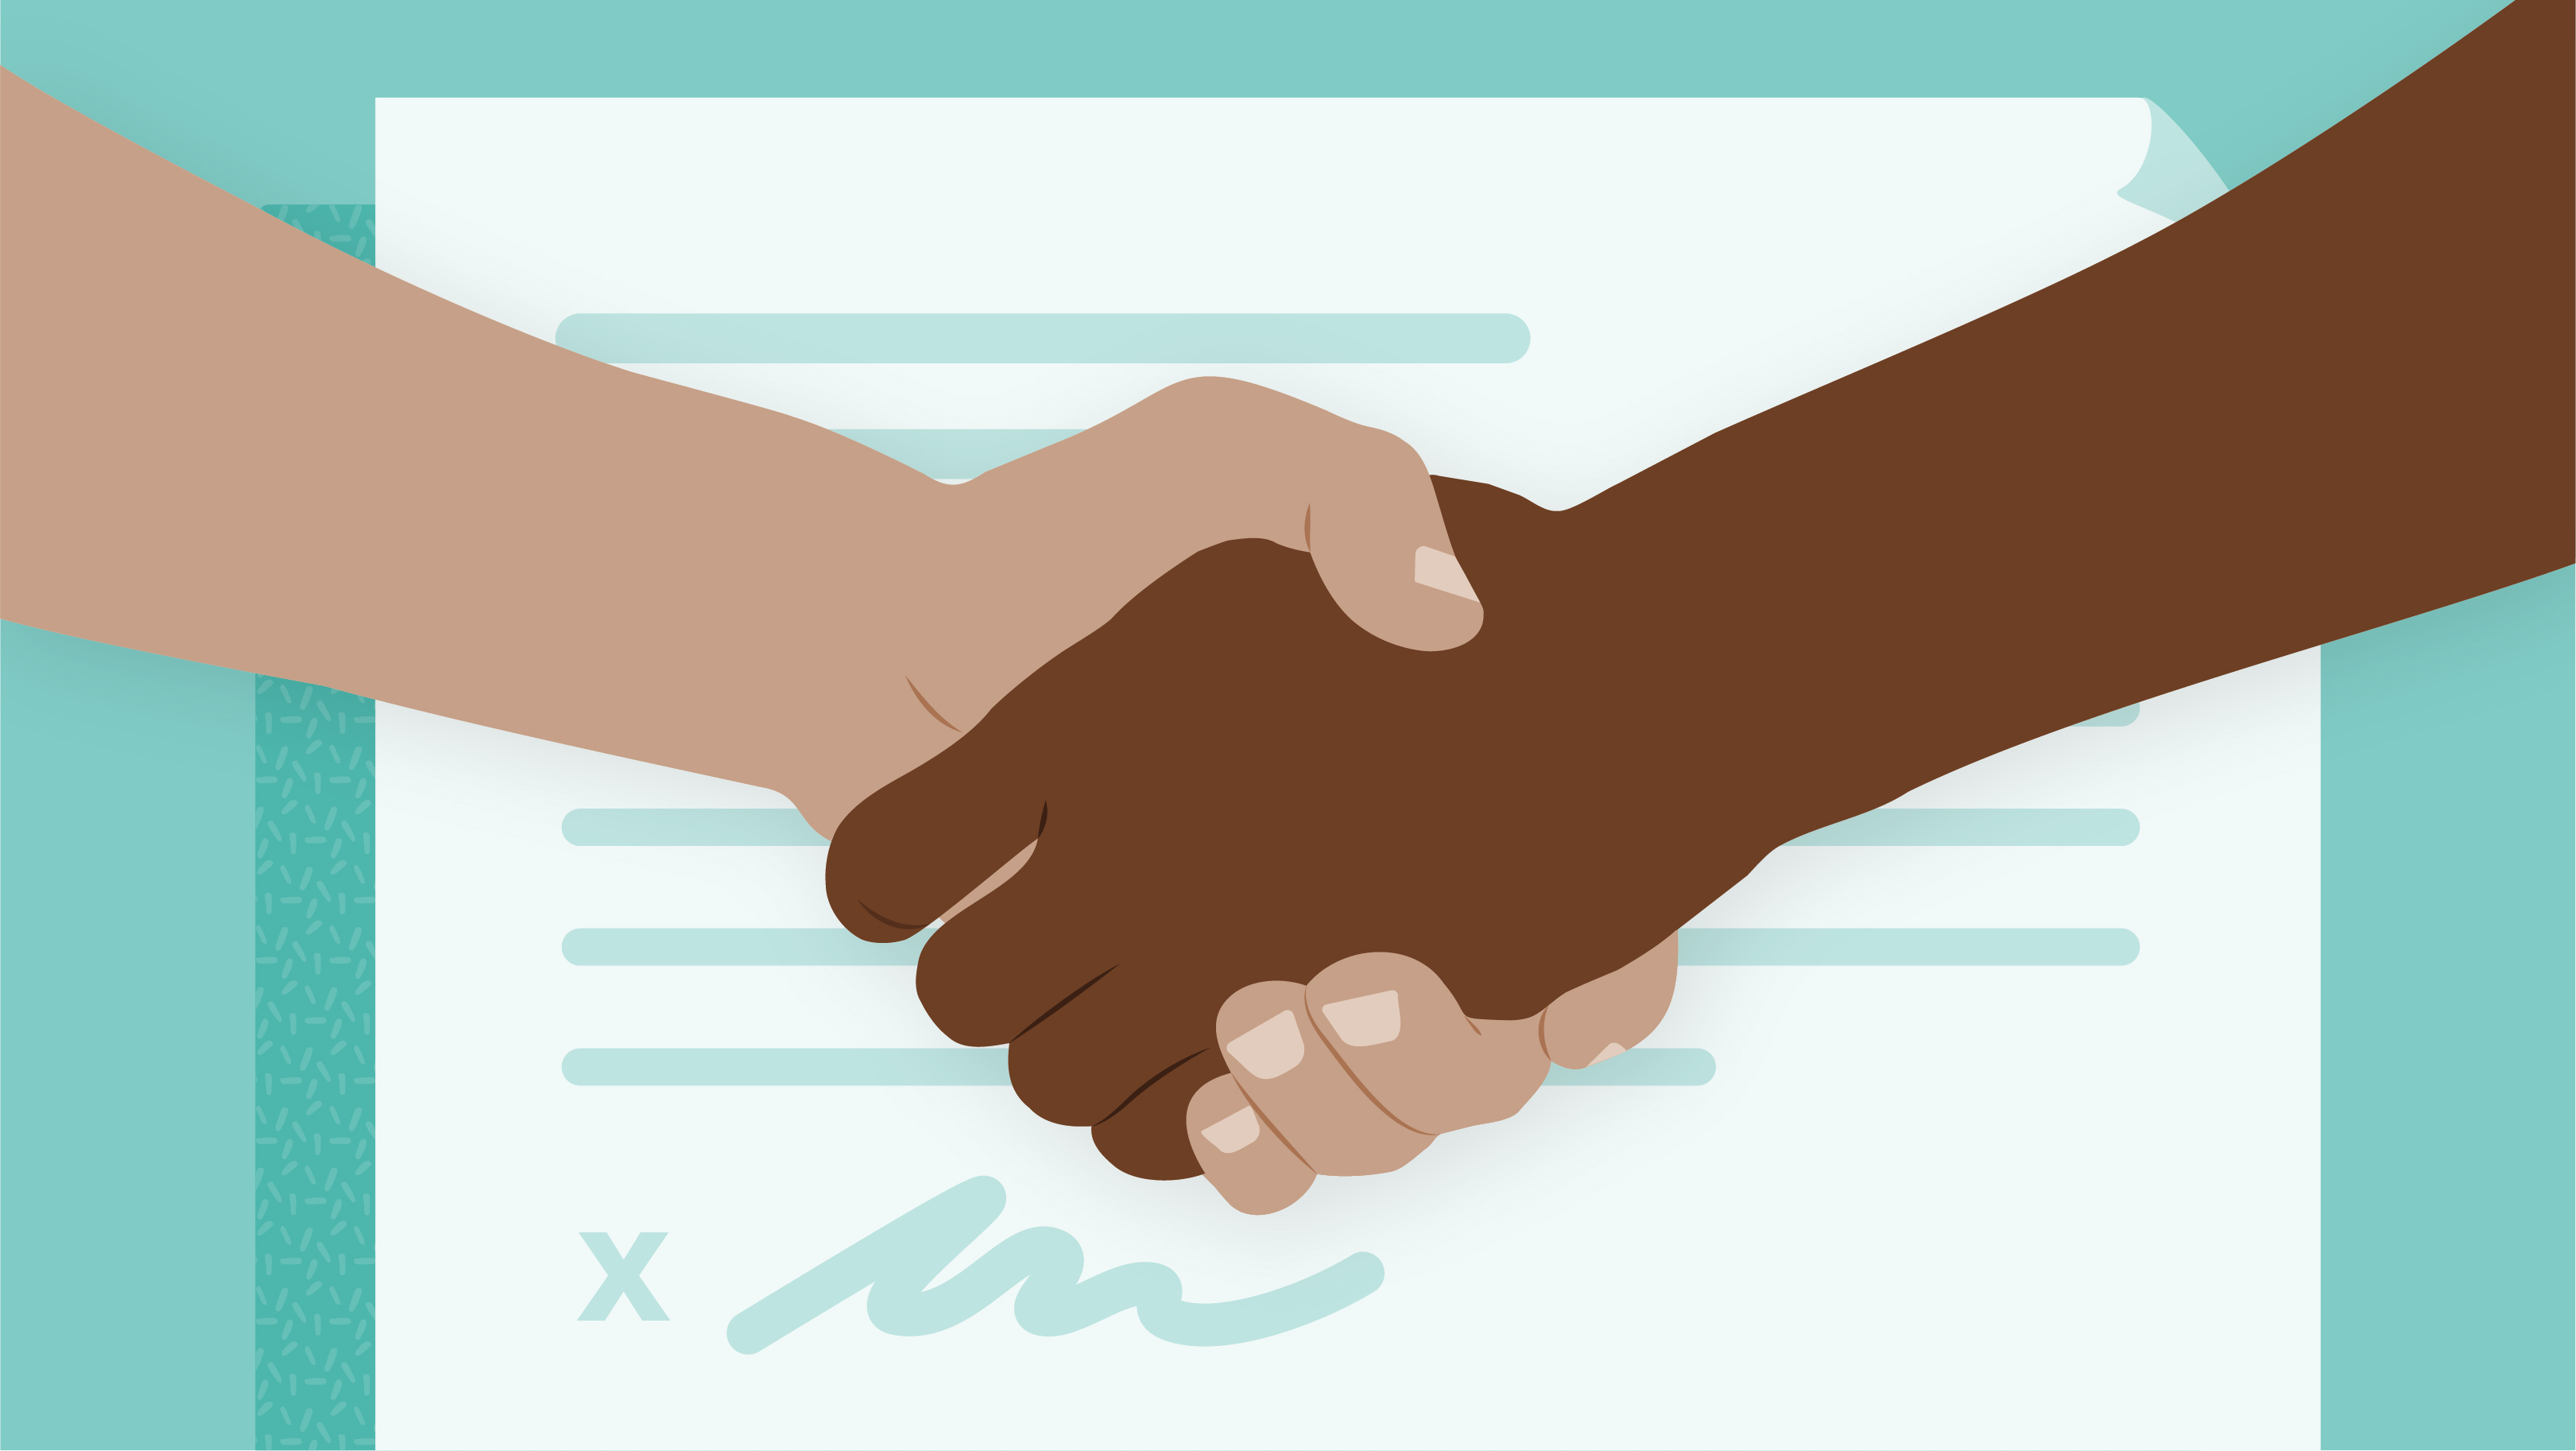 A handshake between business partners above a signed contract.